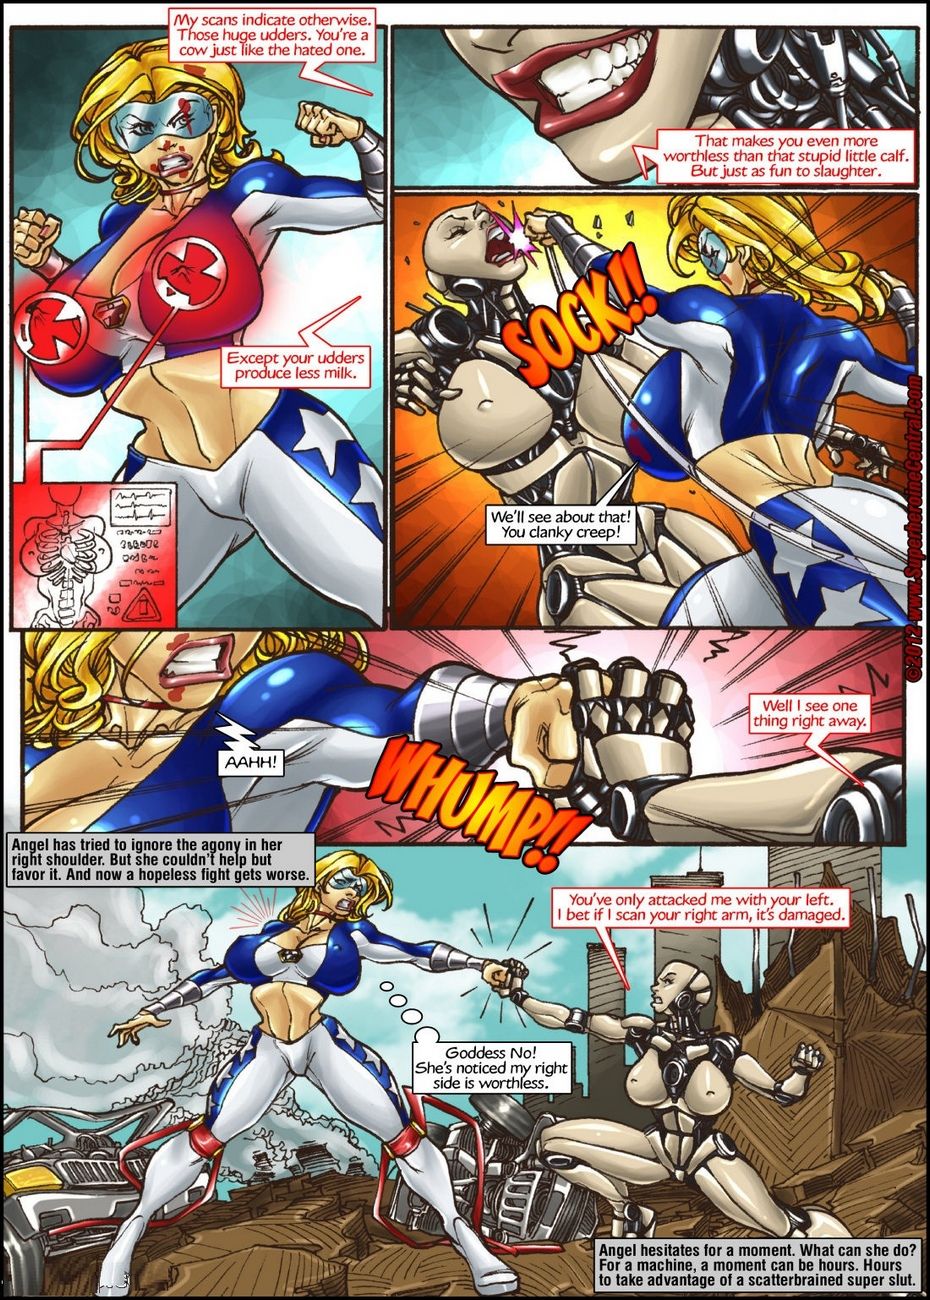 American Angel 1 - Smart Weapon page 23